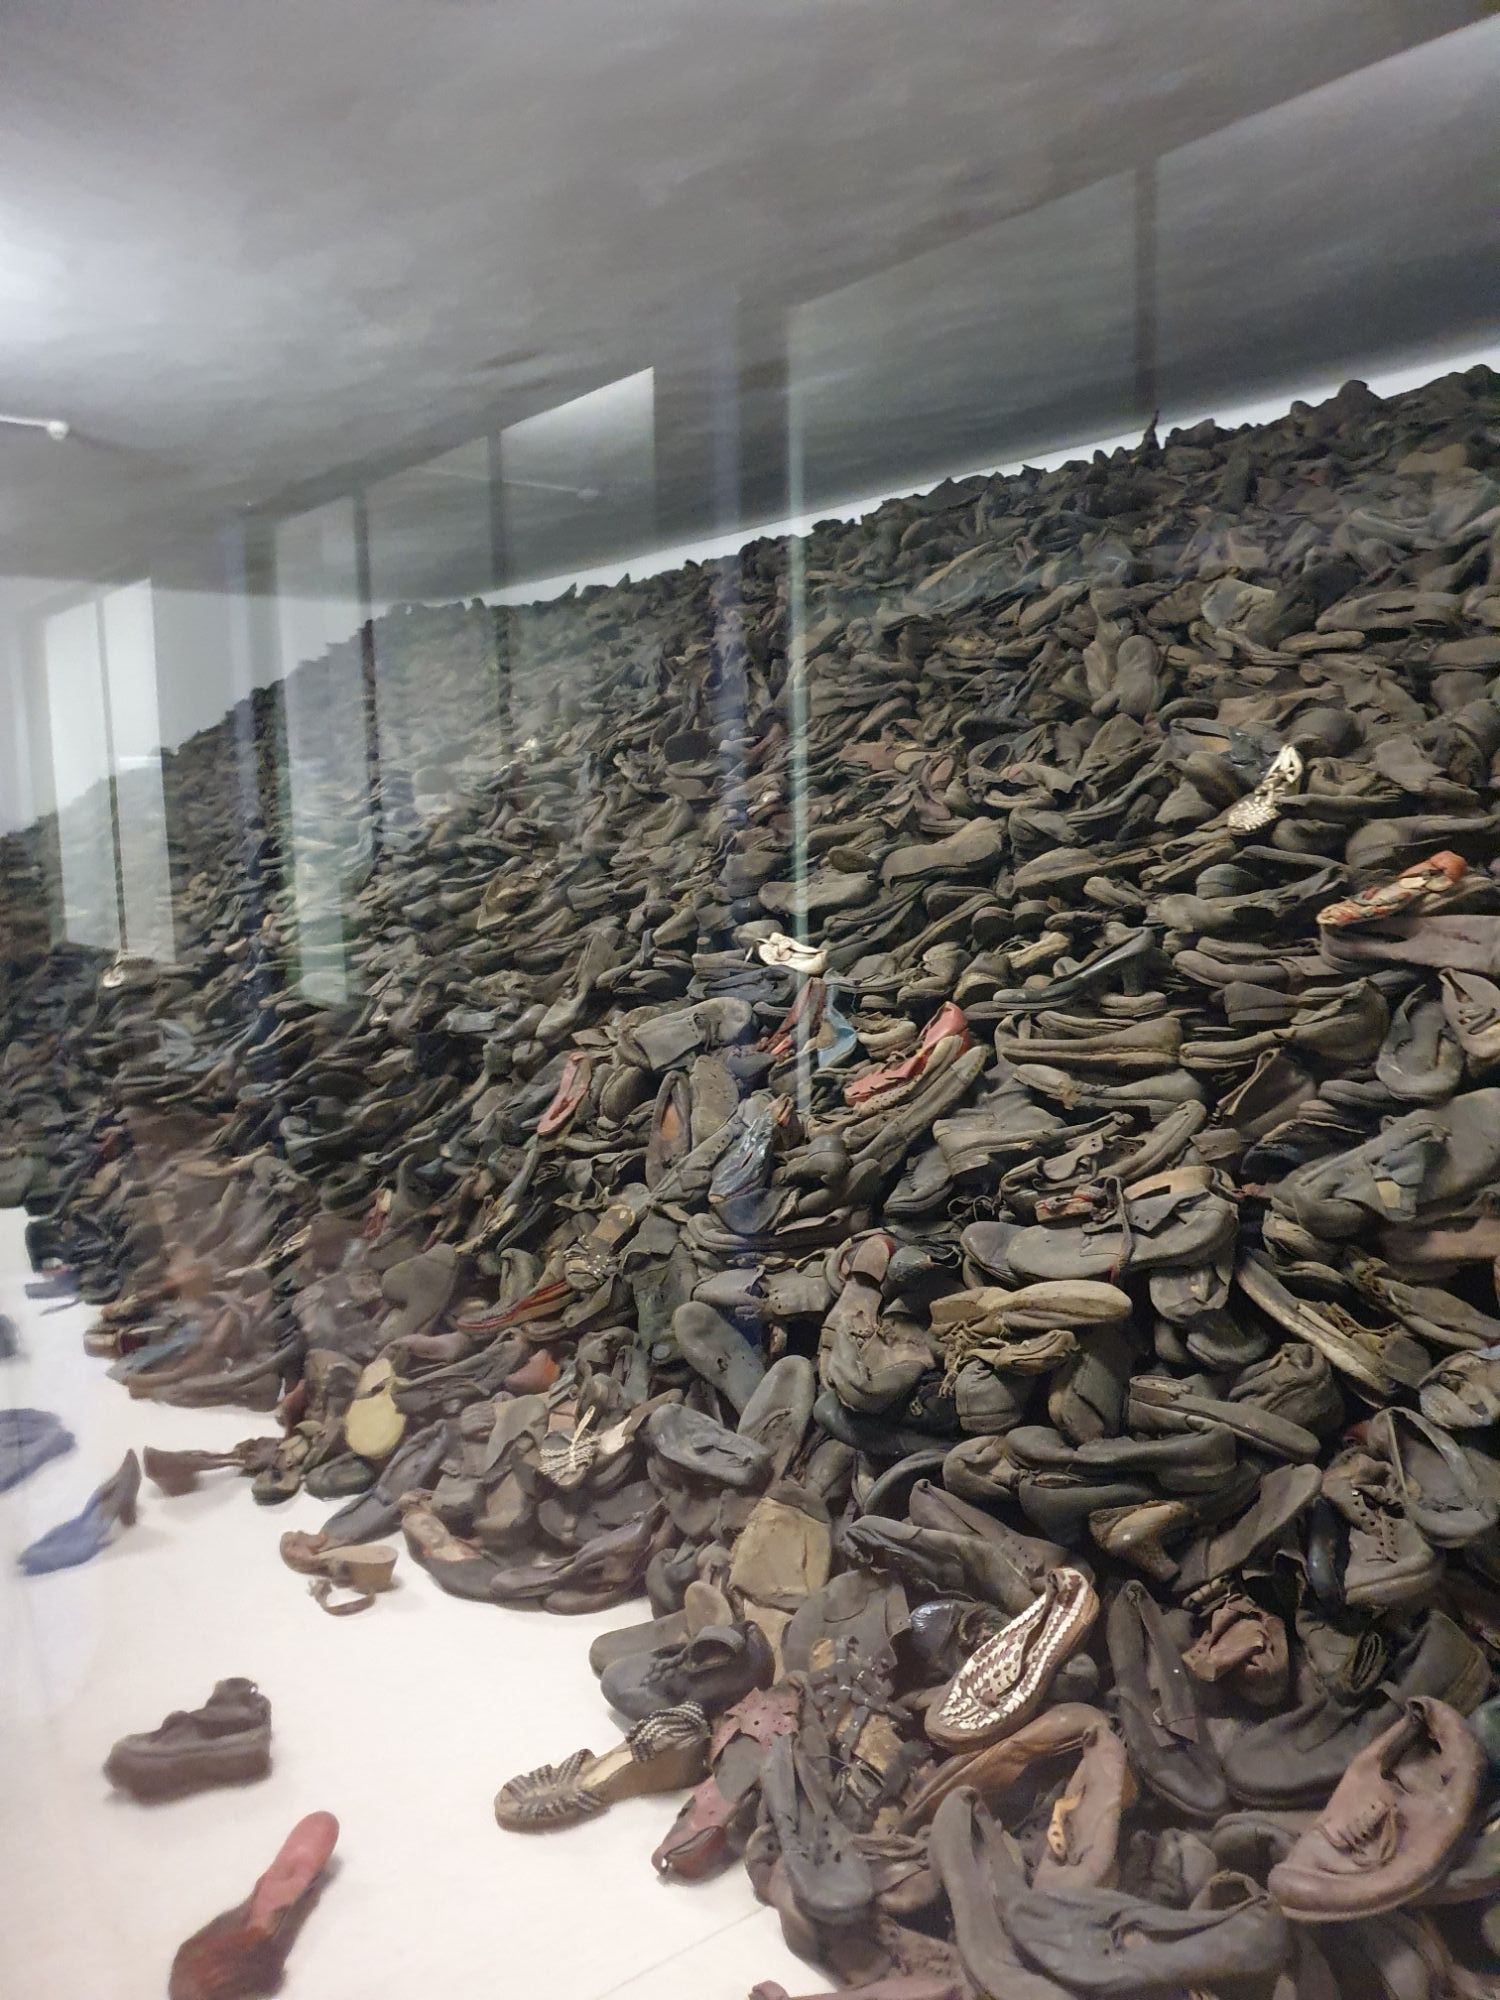 Room of shoes at Auschwitz 1